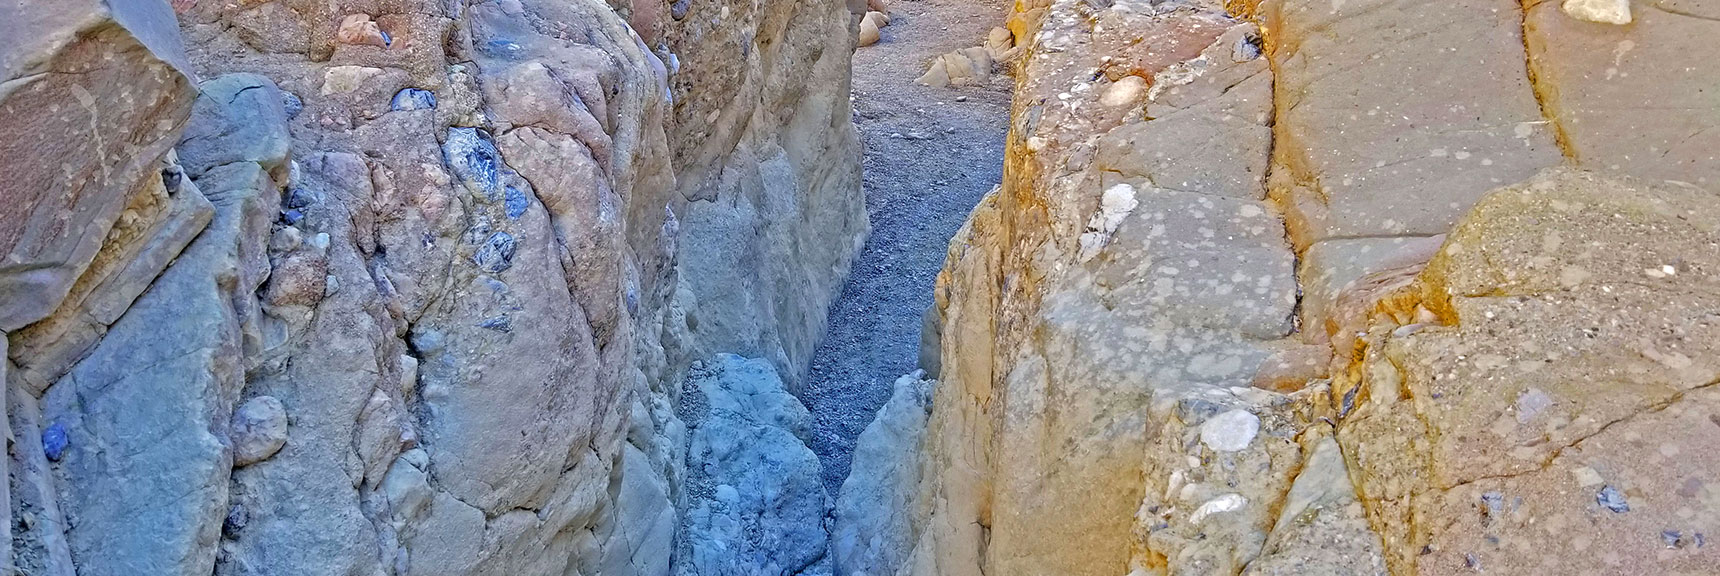 Nearing Gower Gulch Lower Opening the Canyon Dramatically Narrows. | Golden Canyon to Zabriskie Point | Death Valley National Park, California